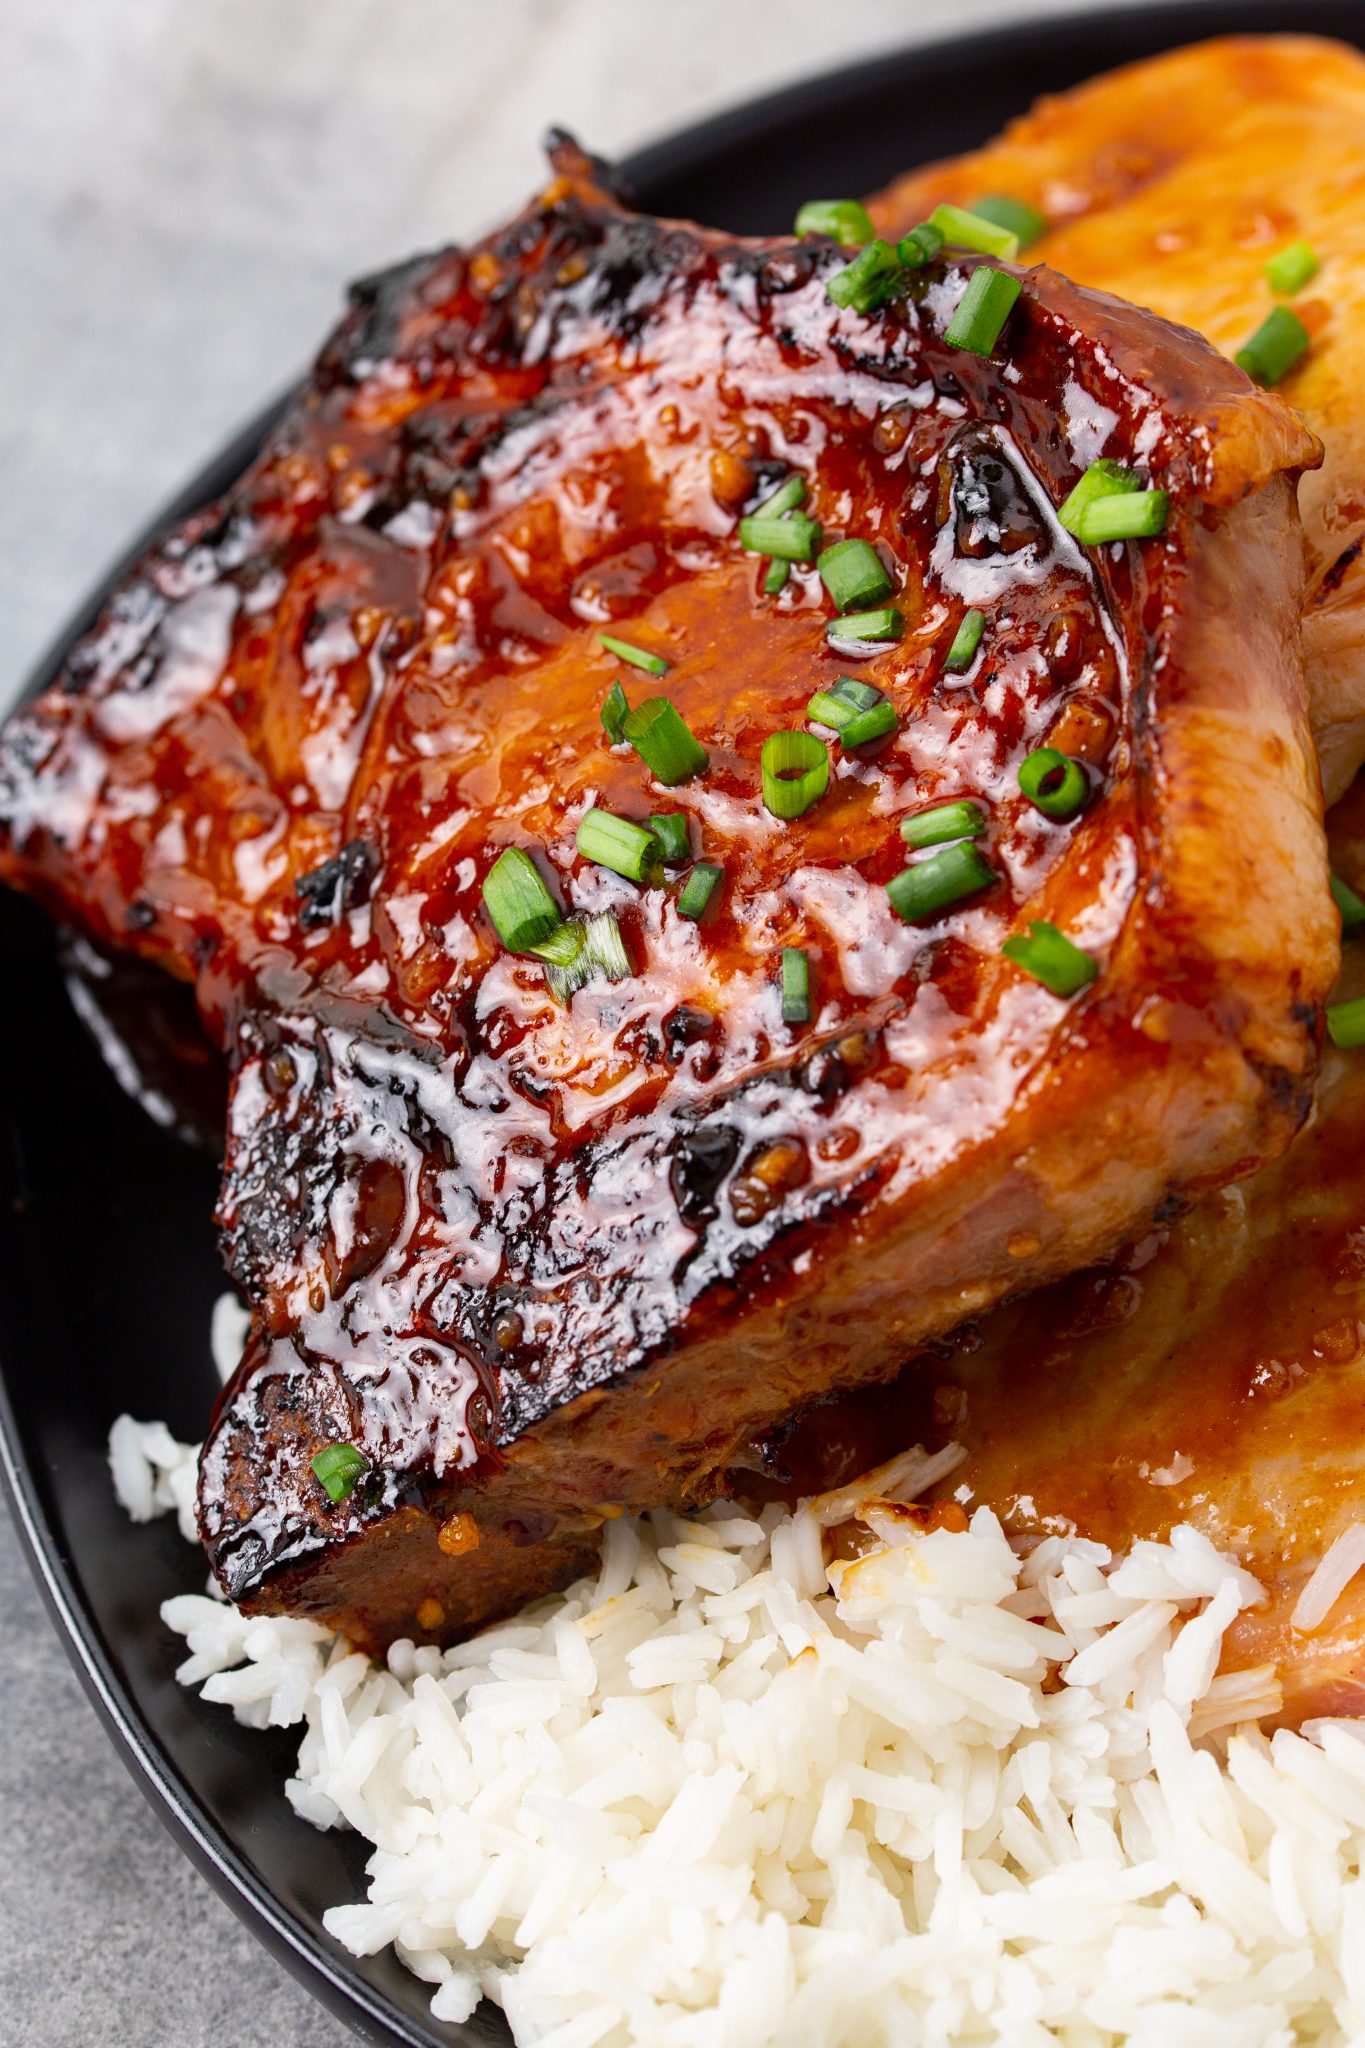 Asian Style Hoisin Glazed Bone In Pork Chops served with rice and garnished with chives